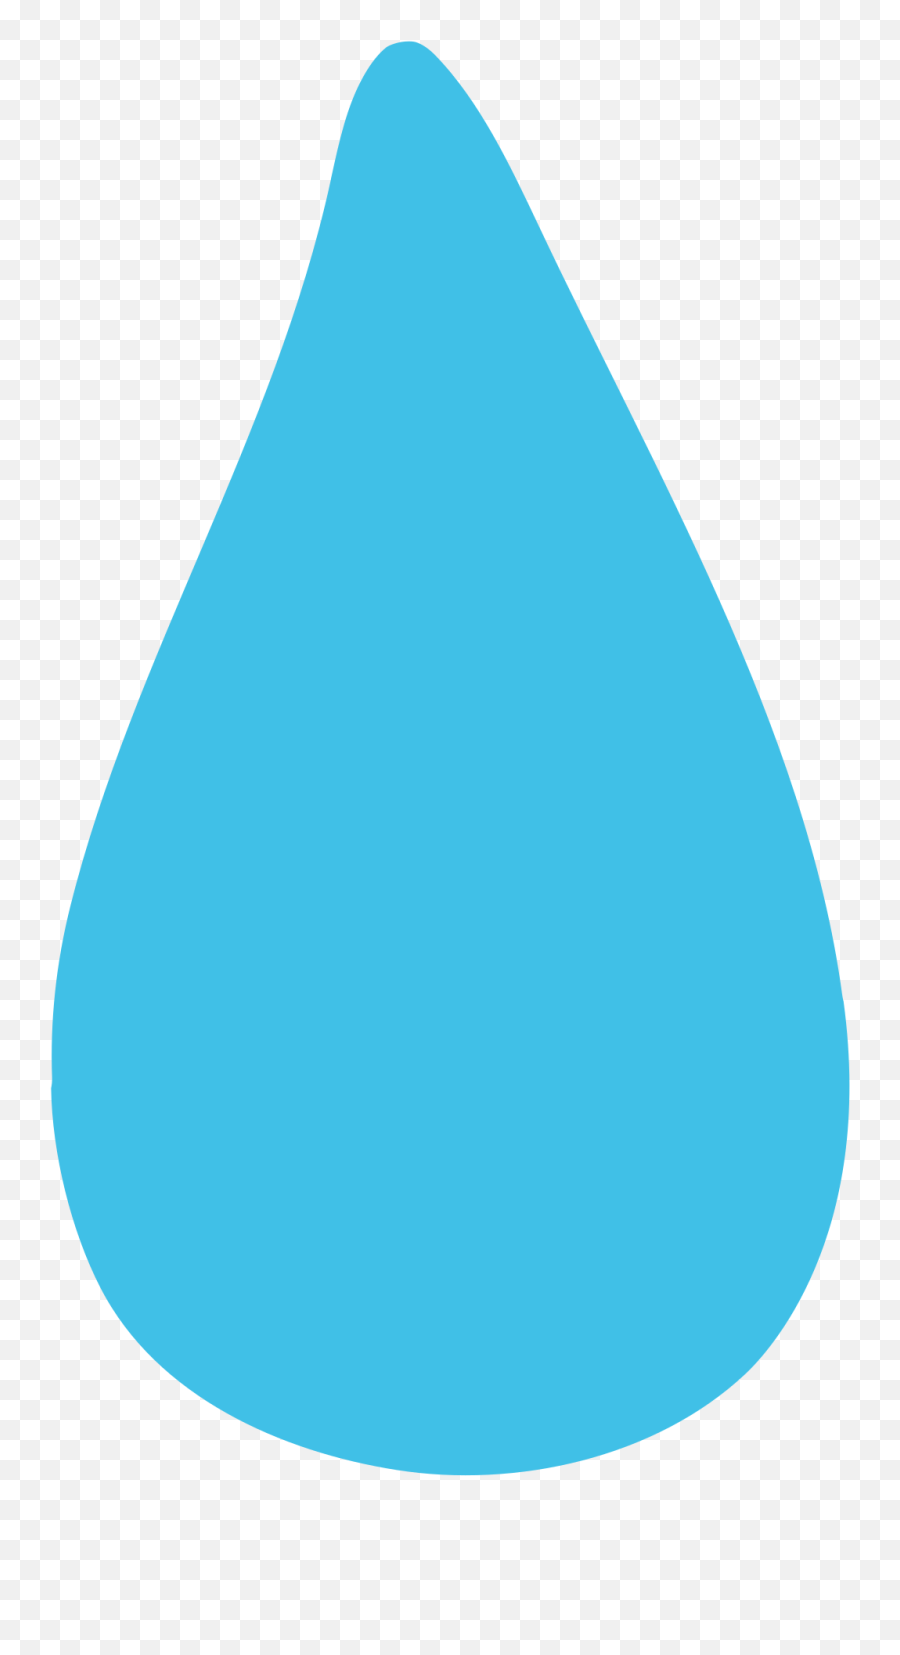 Sweat Drop Png 2 Image - Turquoise Water Drops Clipart,Sweat Emoji Png